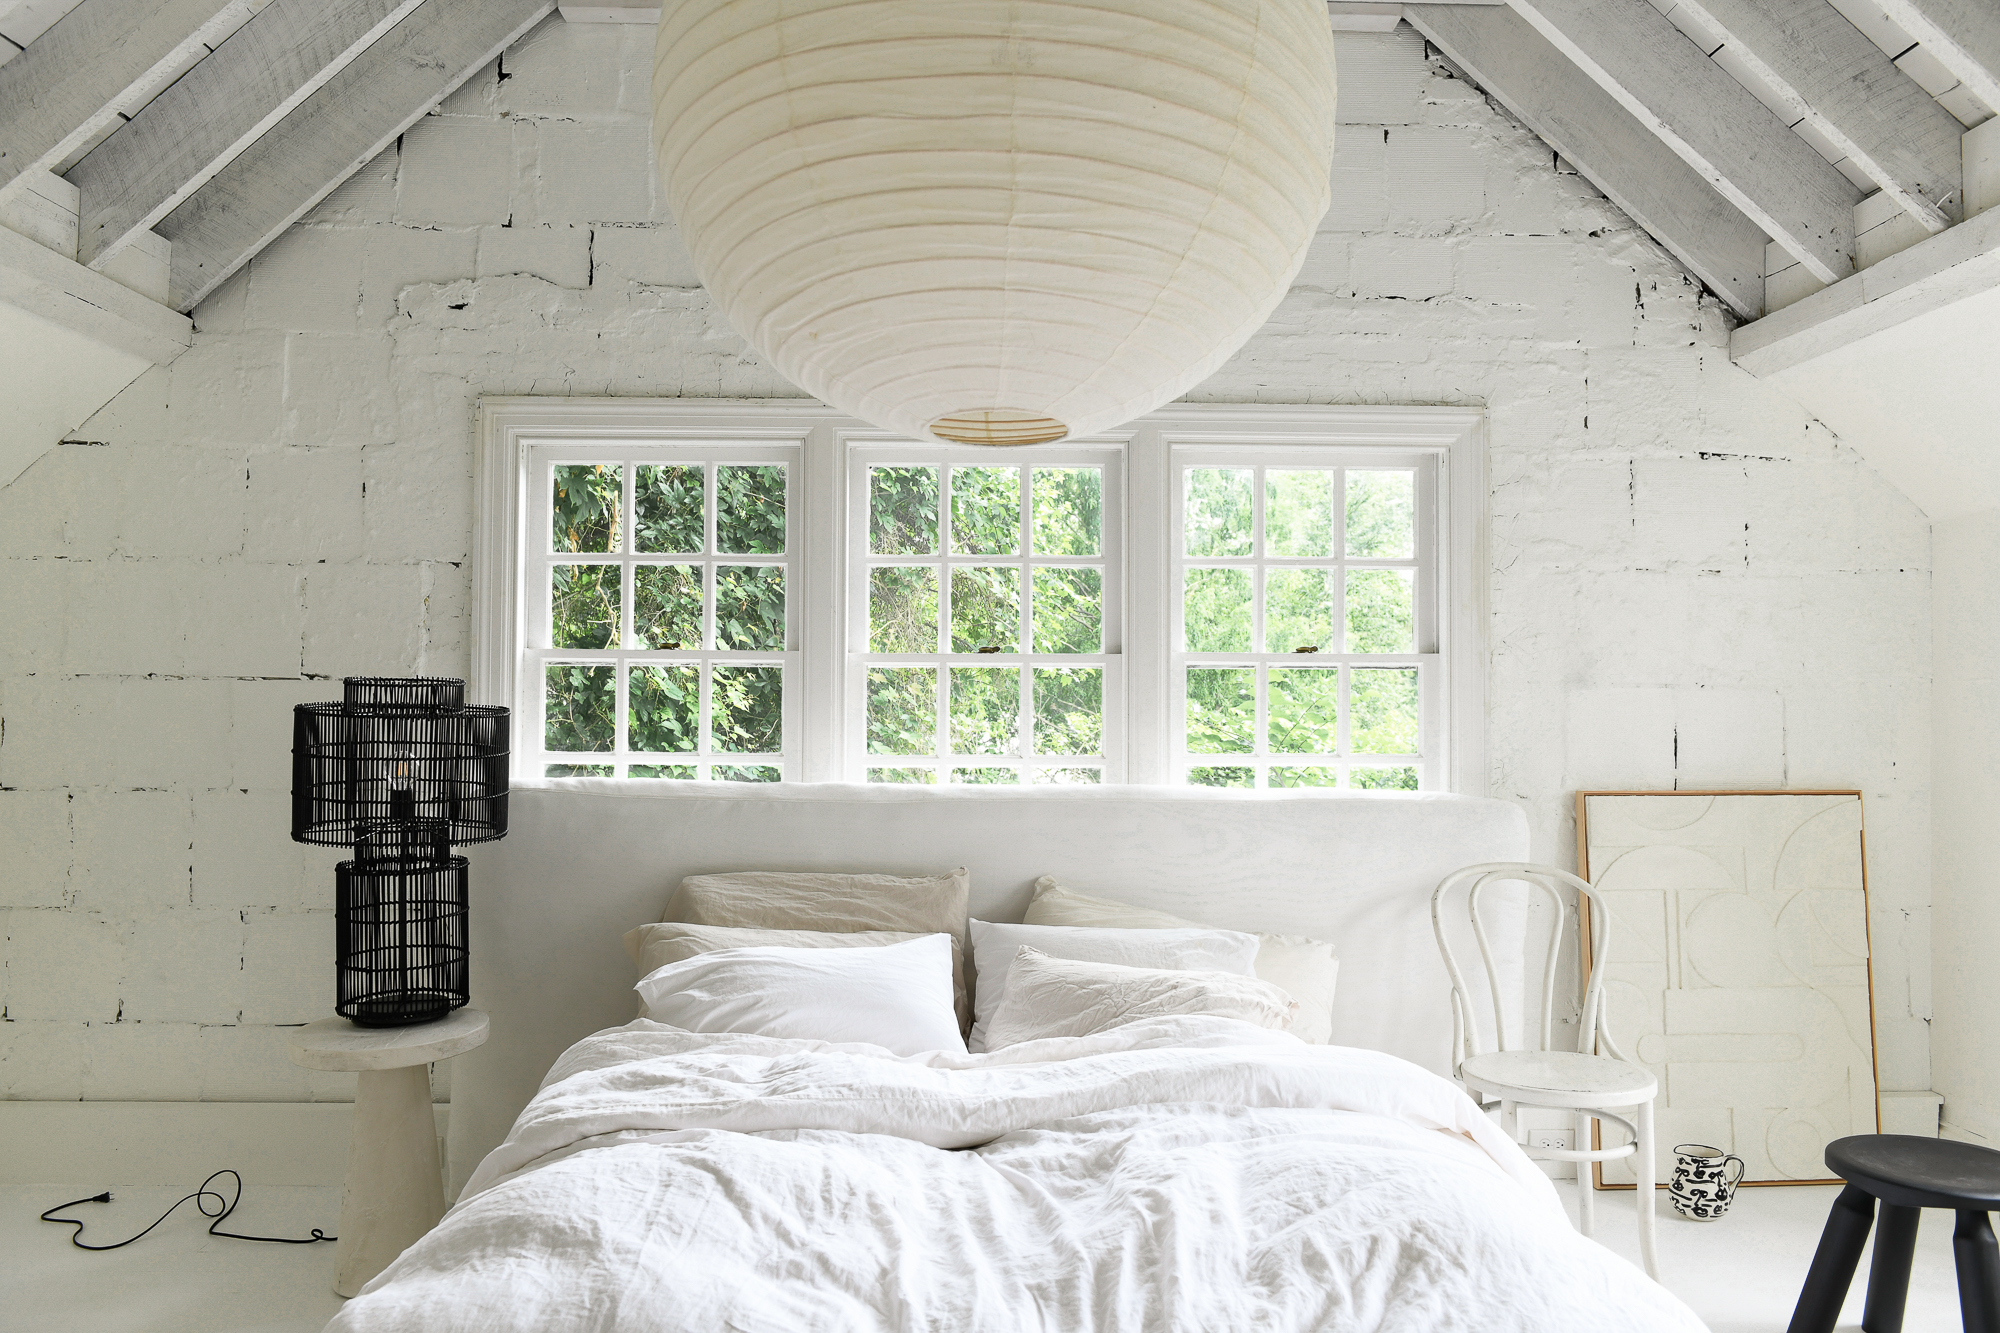 Leanne Ford’s rustic bedroom with brick walls and beams painted in Natural White